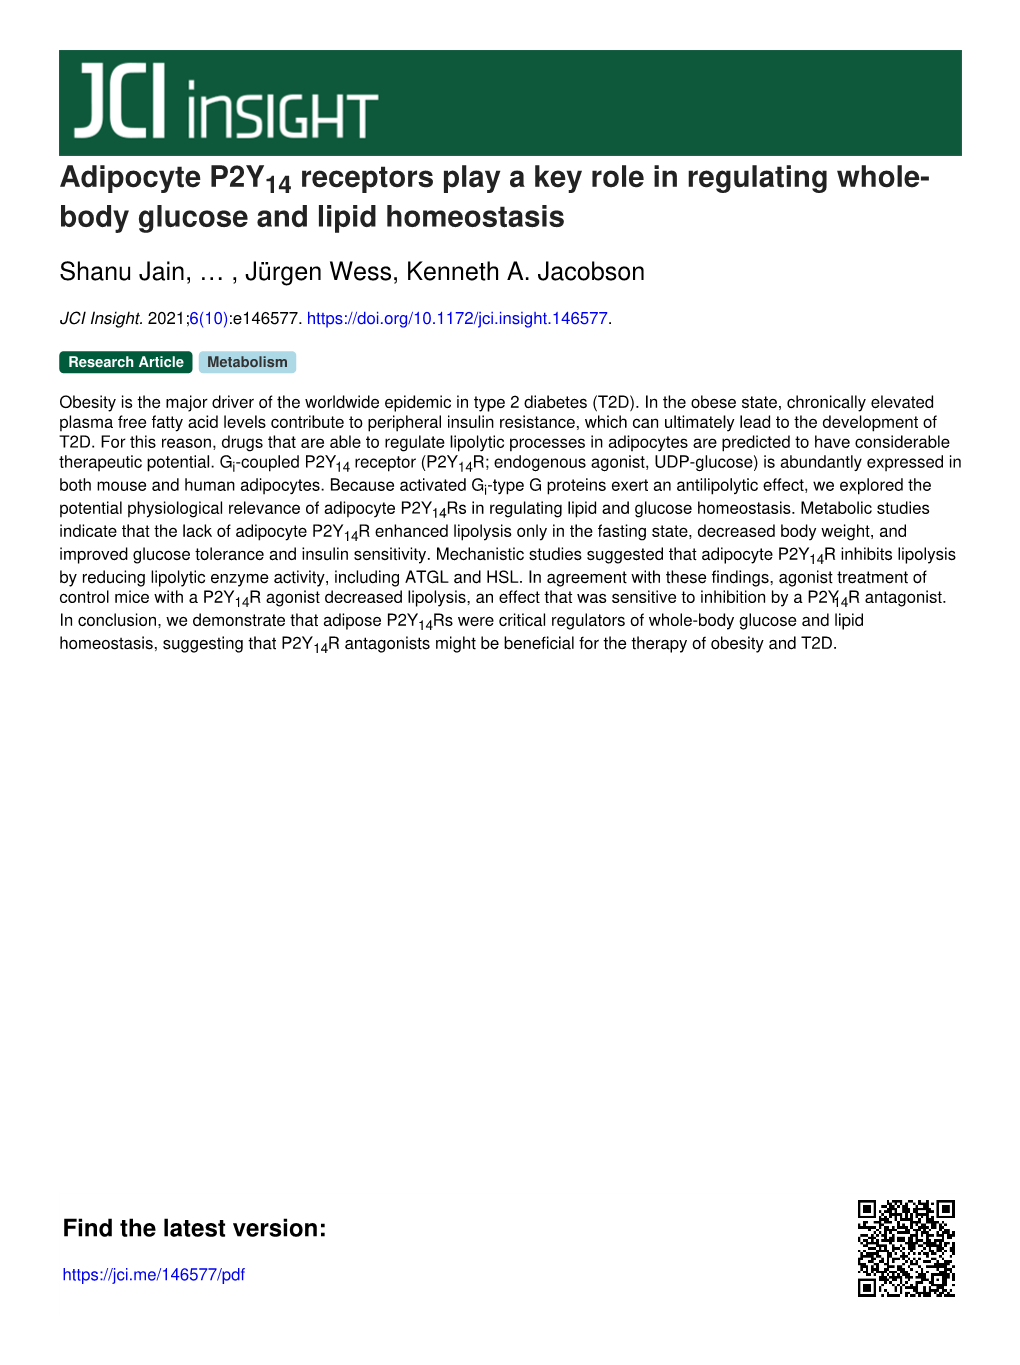 Adipocyte P2Y14 Receptors Play a Key Role in Regulating Whole- Body Glucose and Lipid Homeostasis